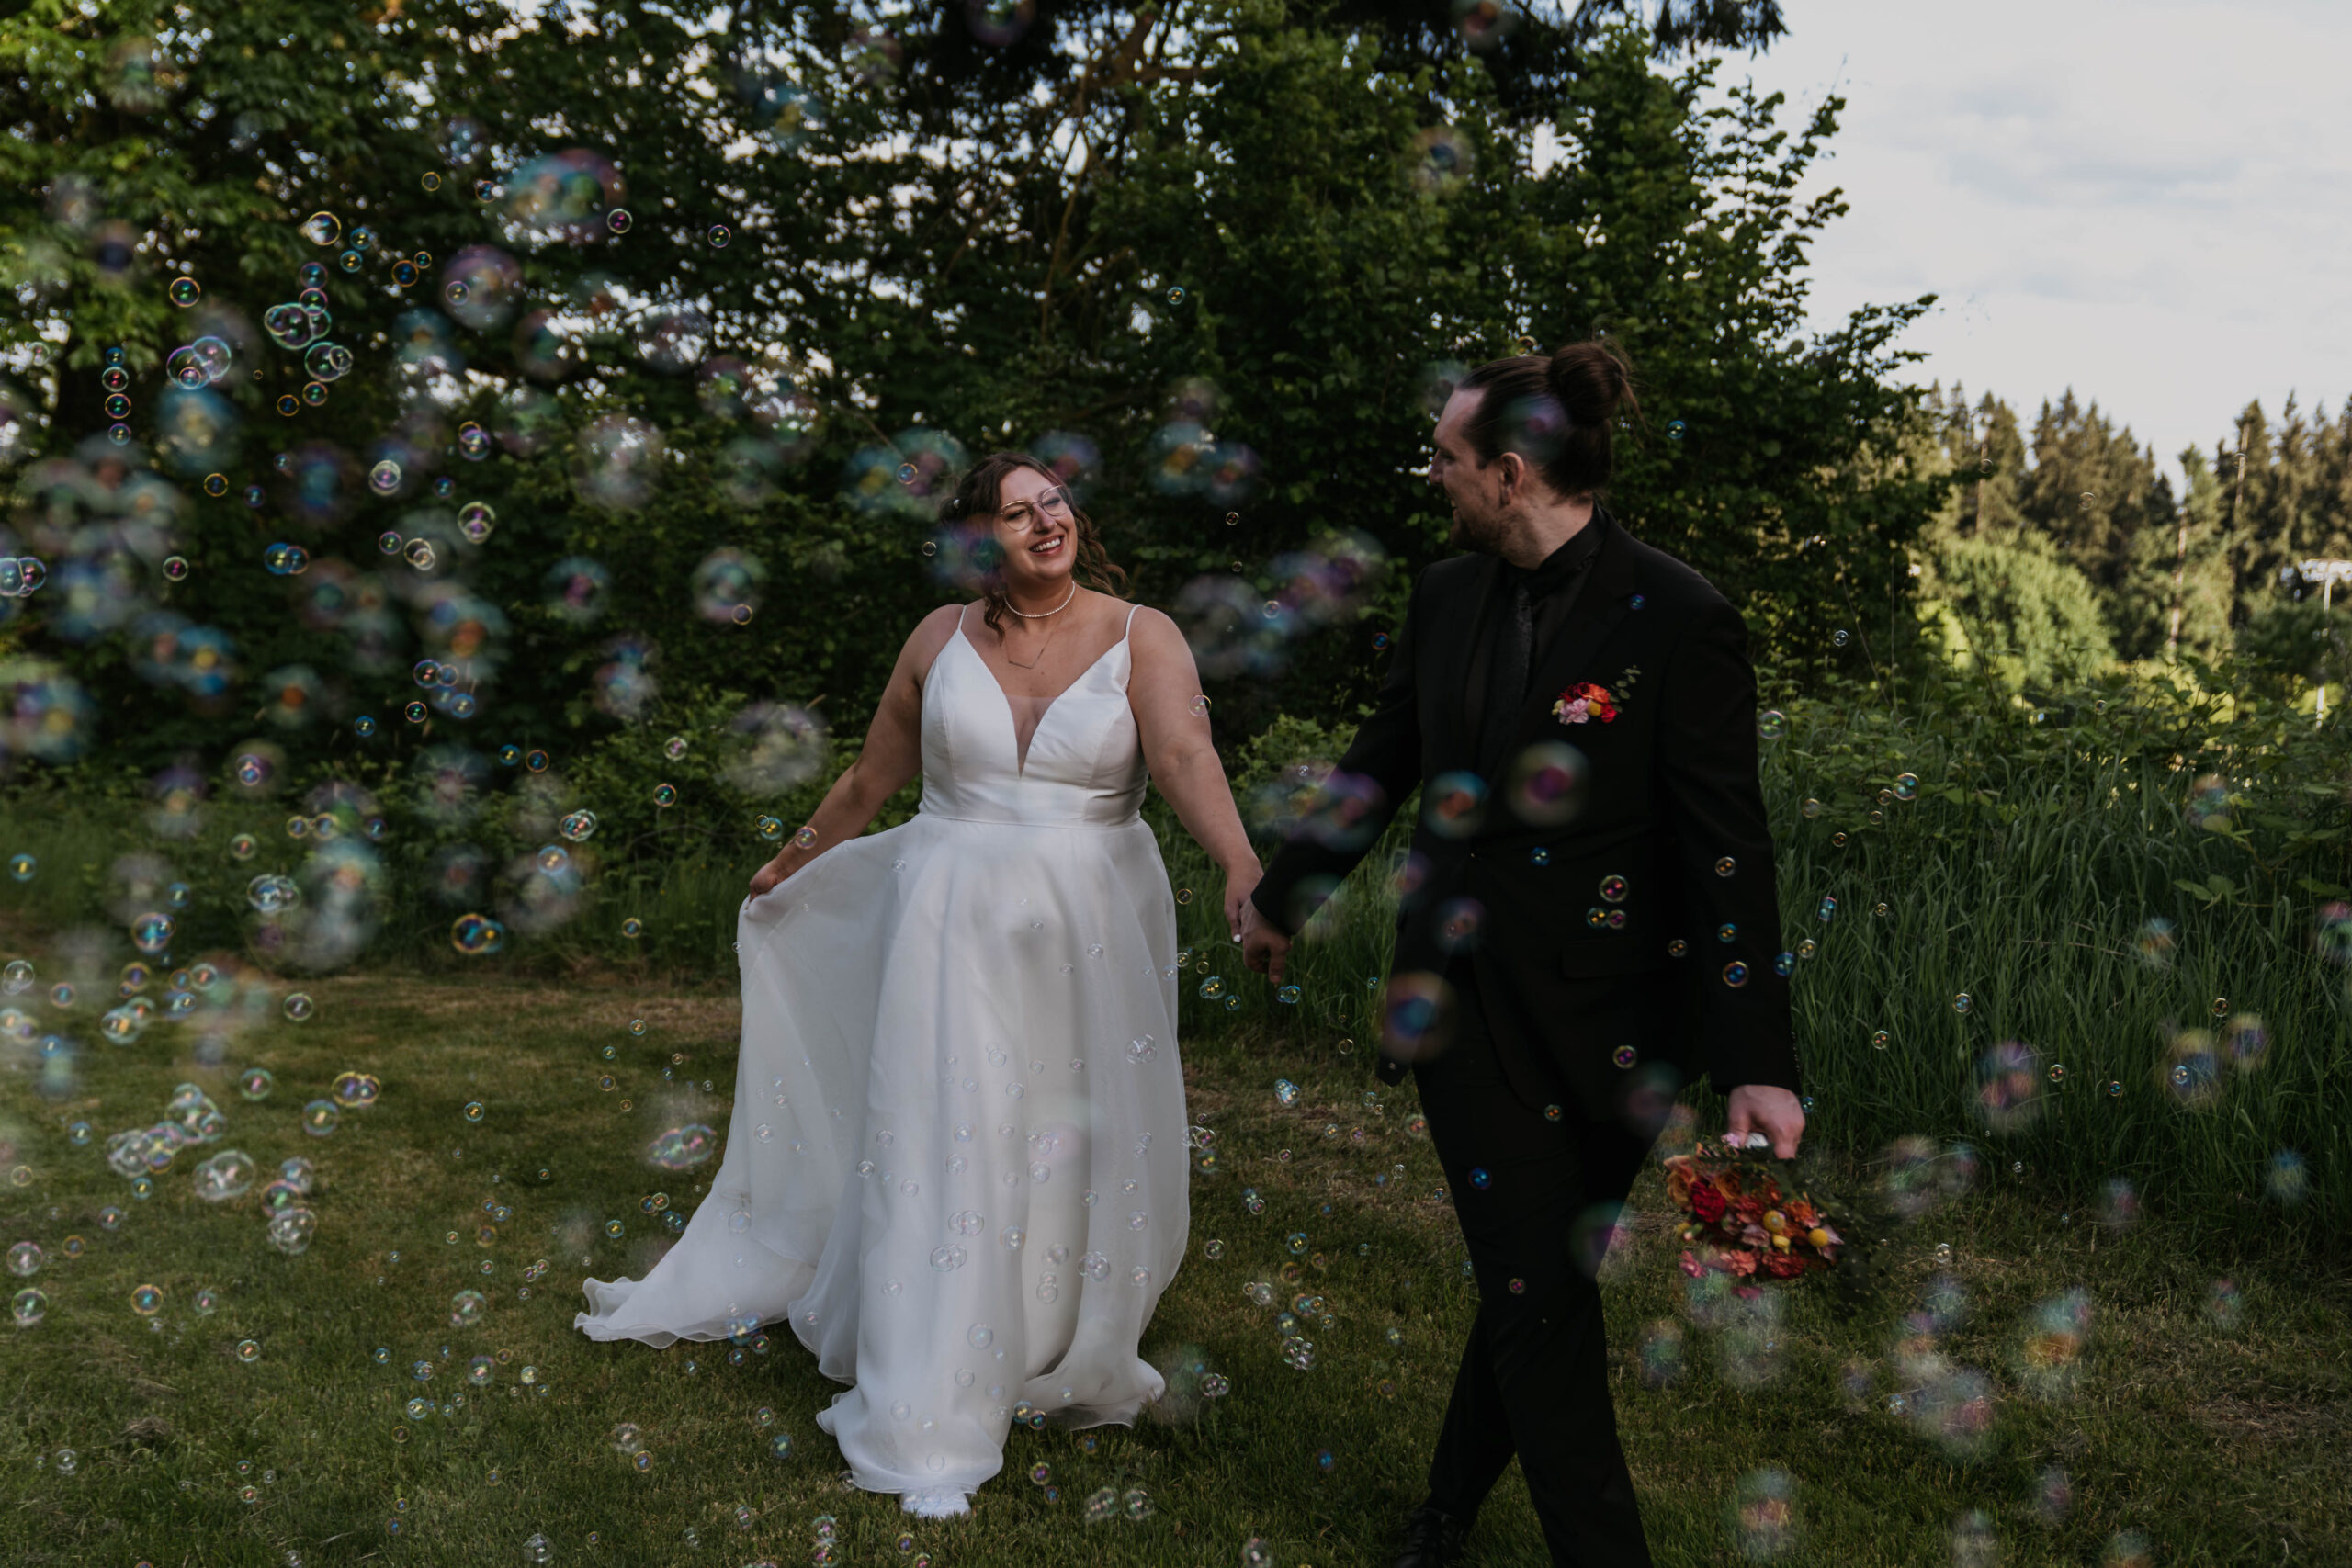 bride and groom holding hands walking through a ton of bubbles in a forest